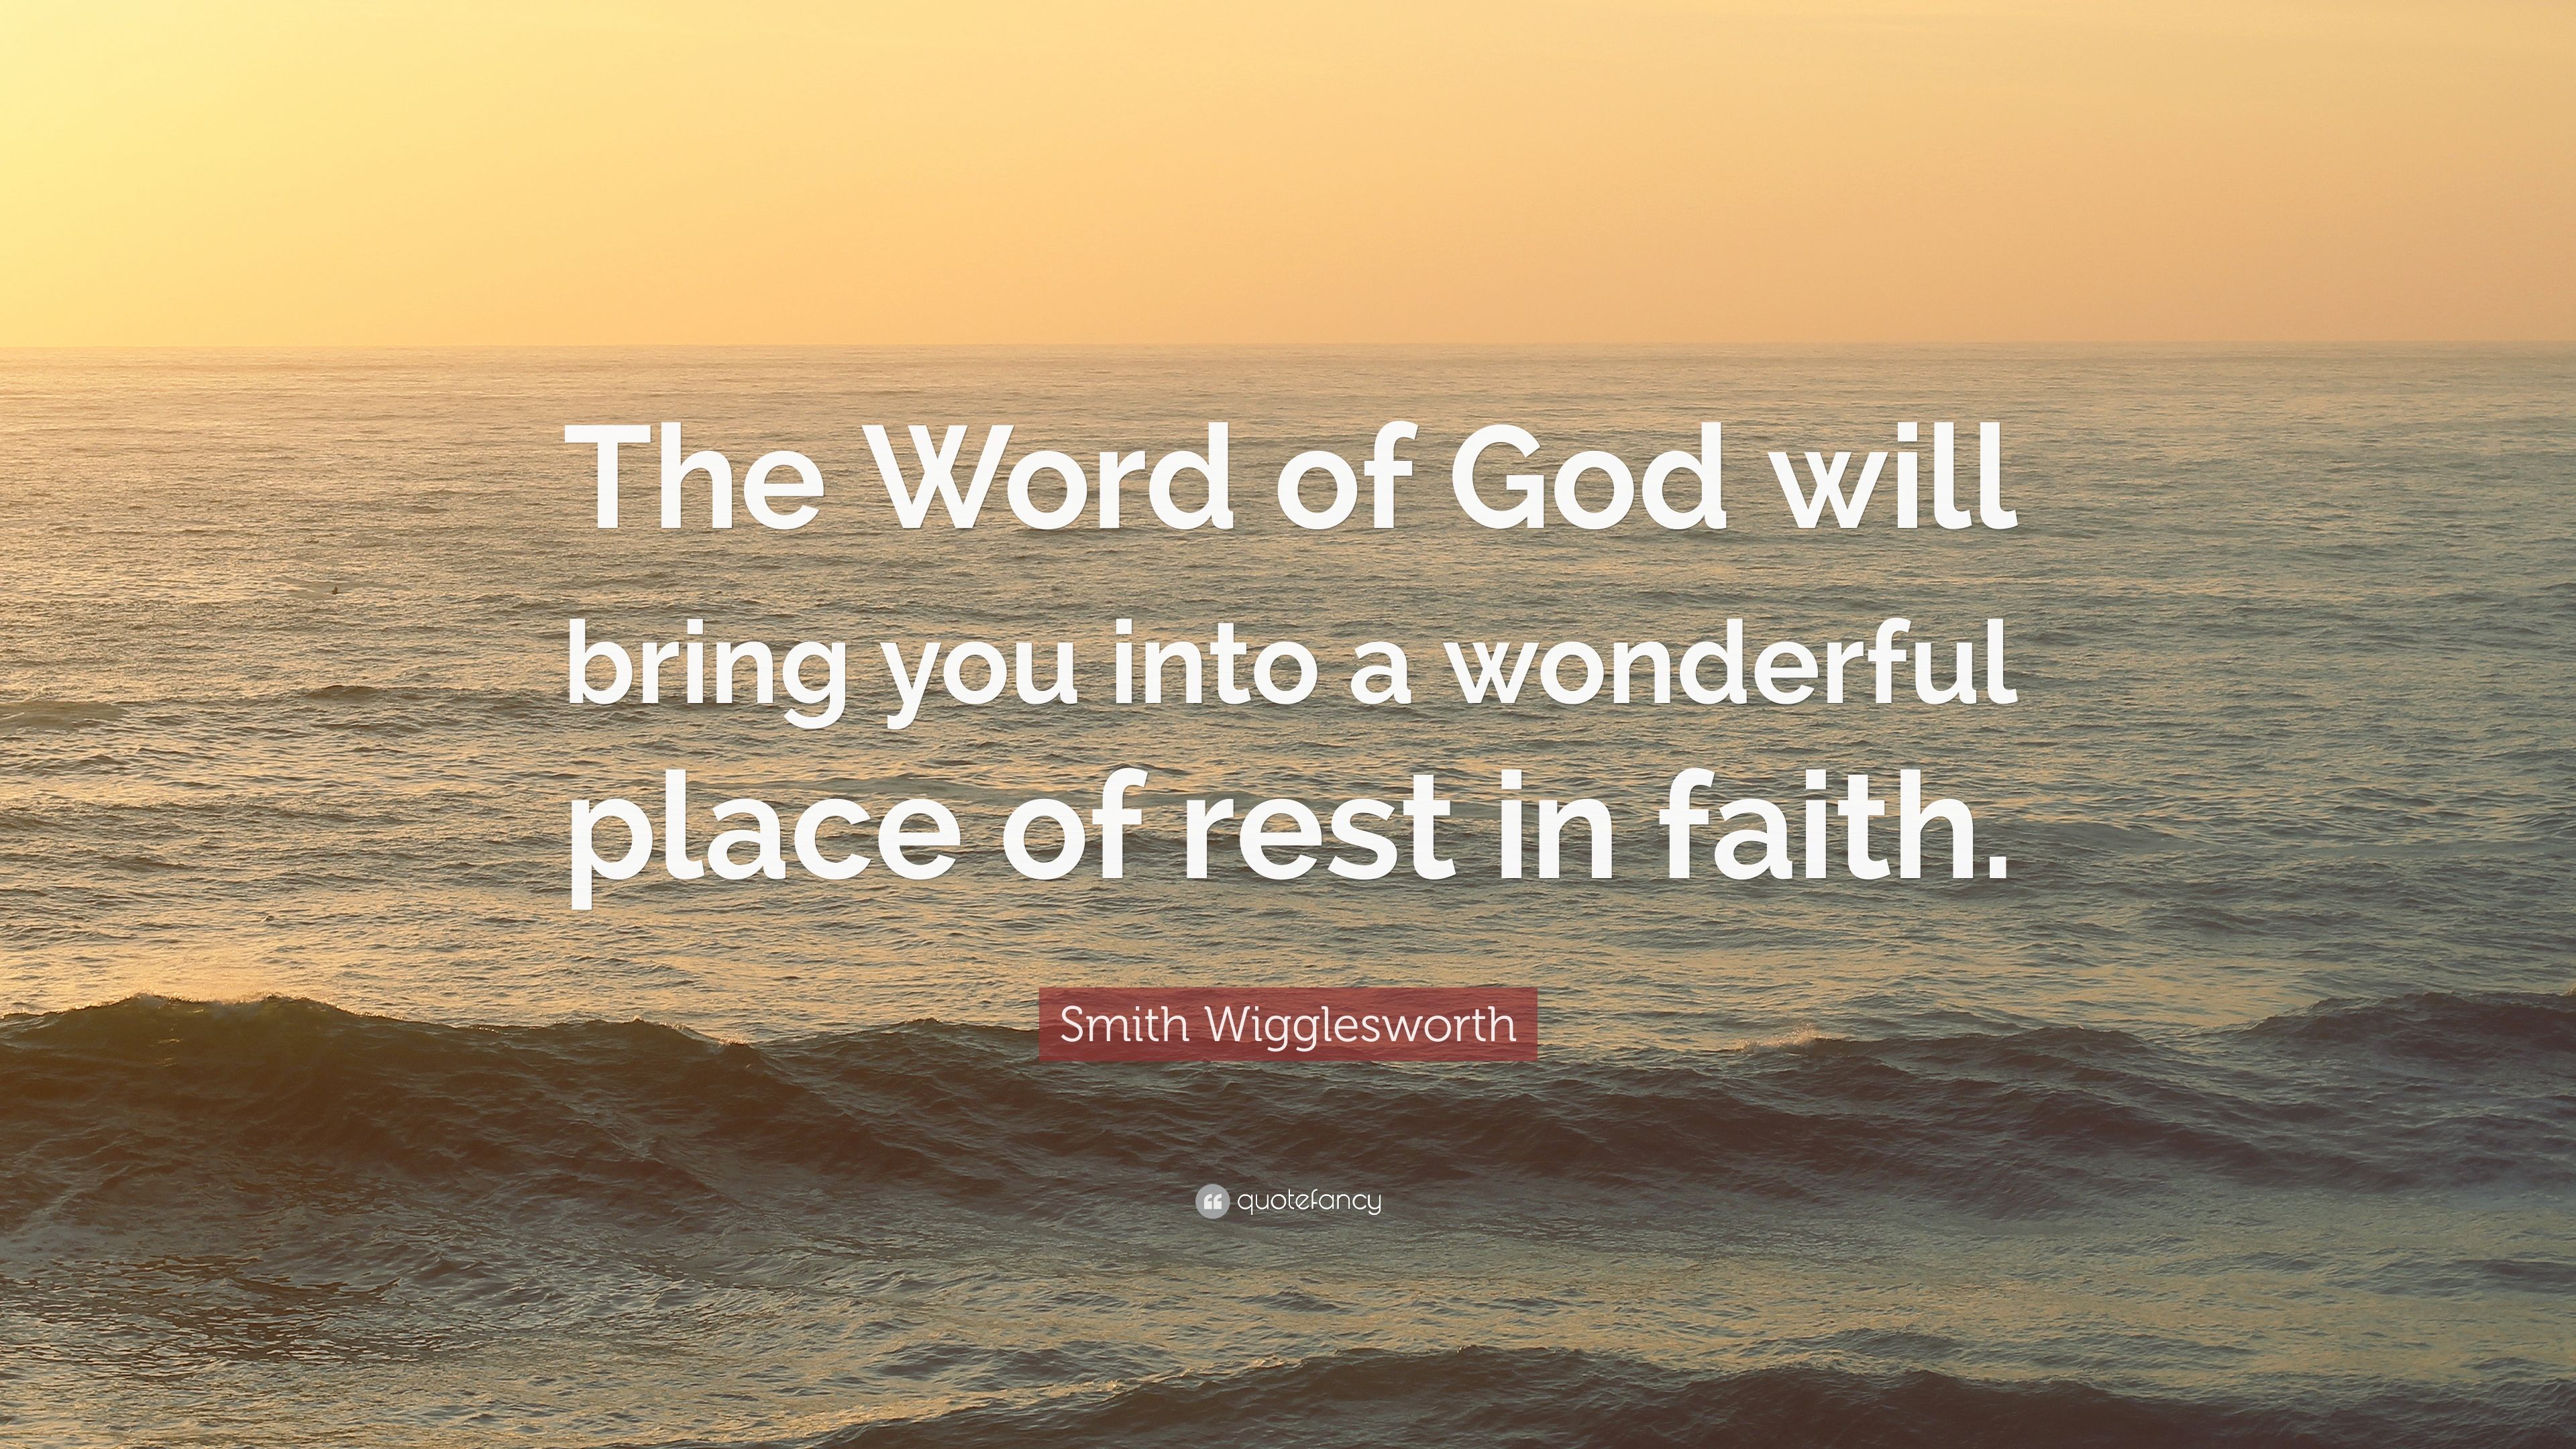 Smith Wigglesworth Quote: “The Word of God will bring you into a